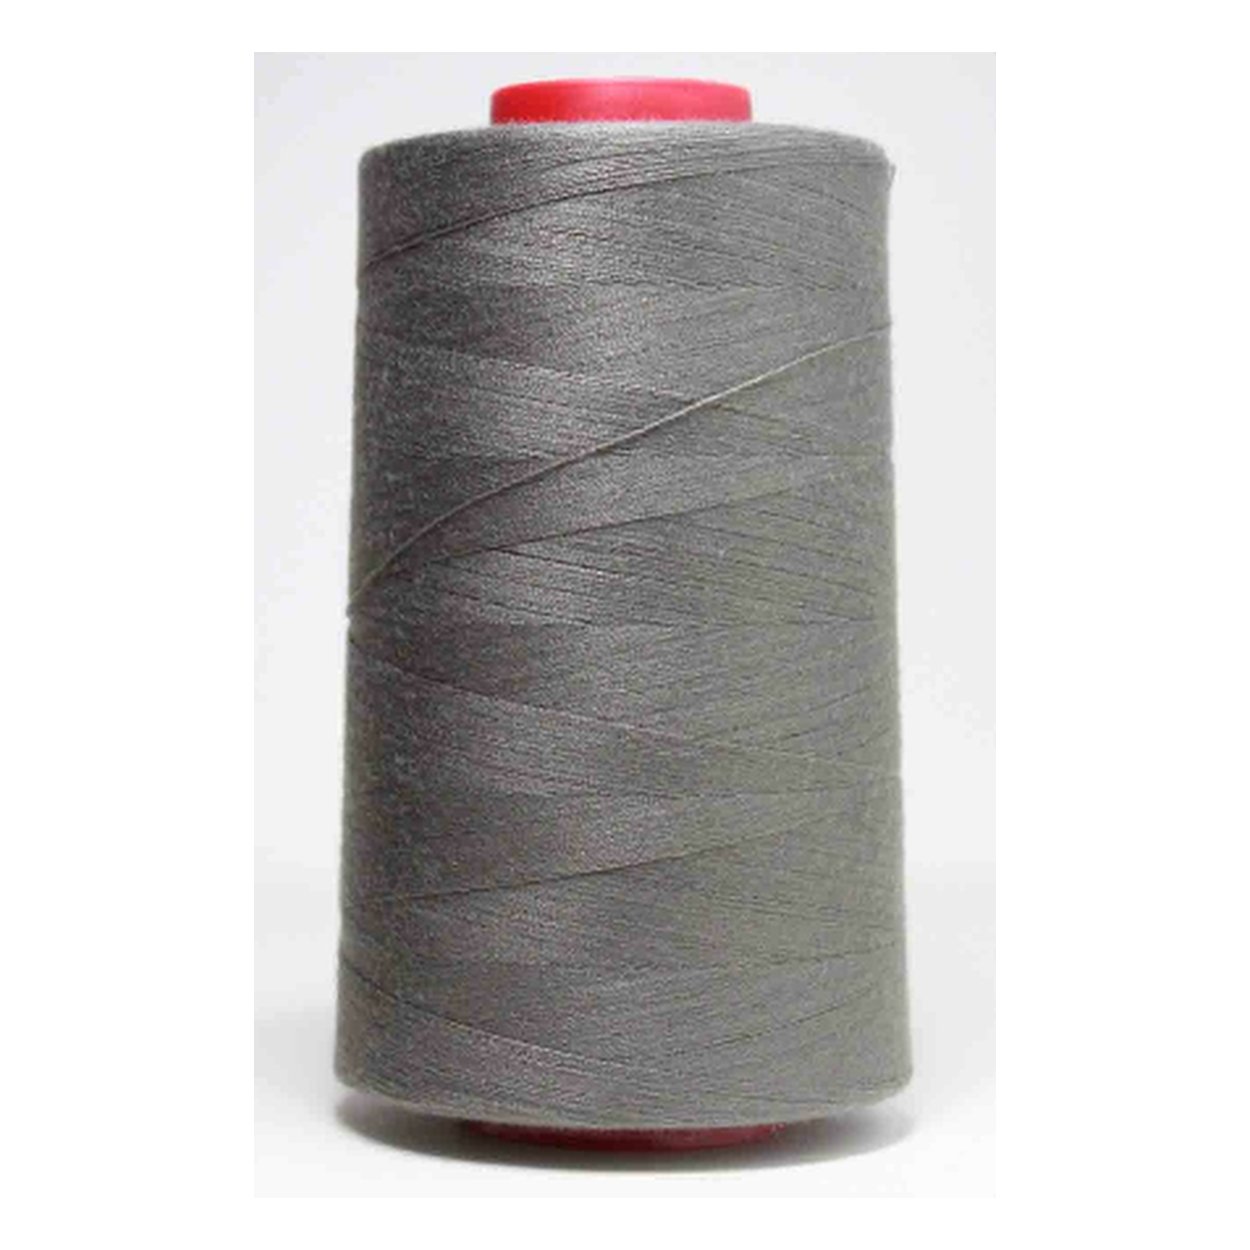 Moon Thread 5000 Yards from Jaycotts Sewing Supplies